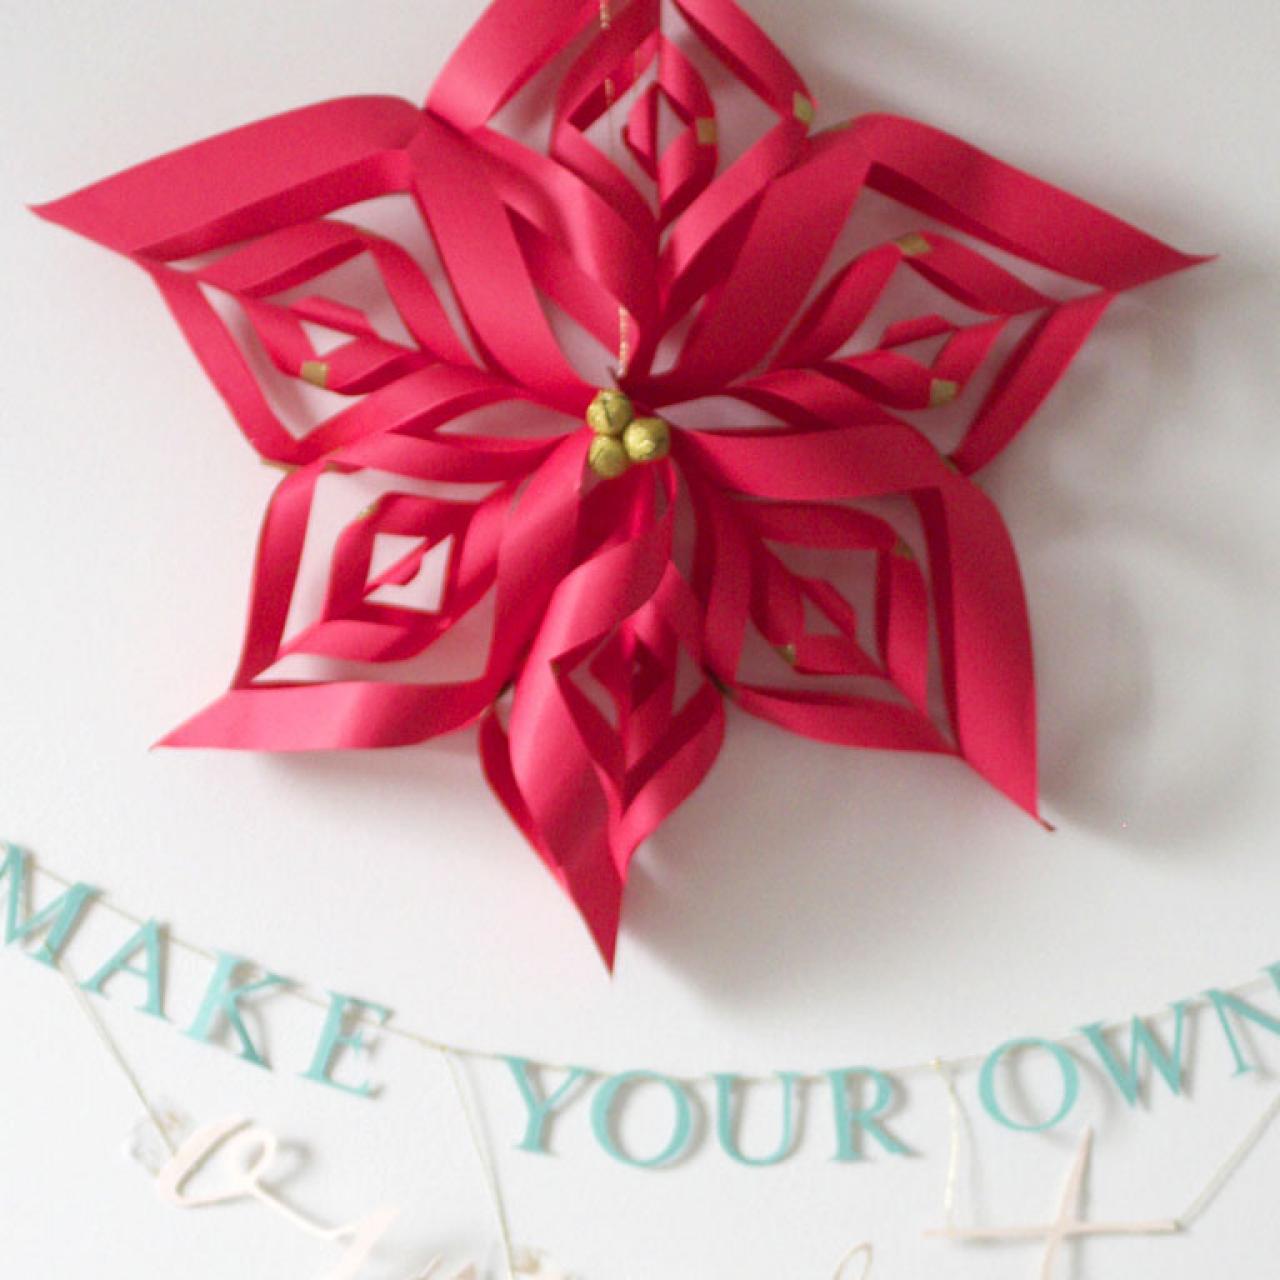 How to Make Paper Christmas Bell - Making Paper Christmas Bells